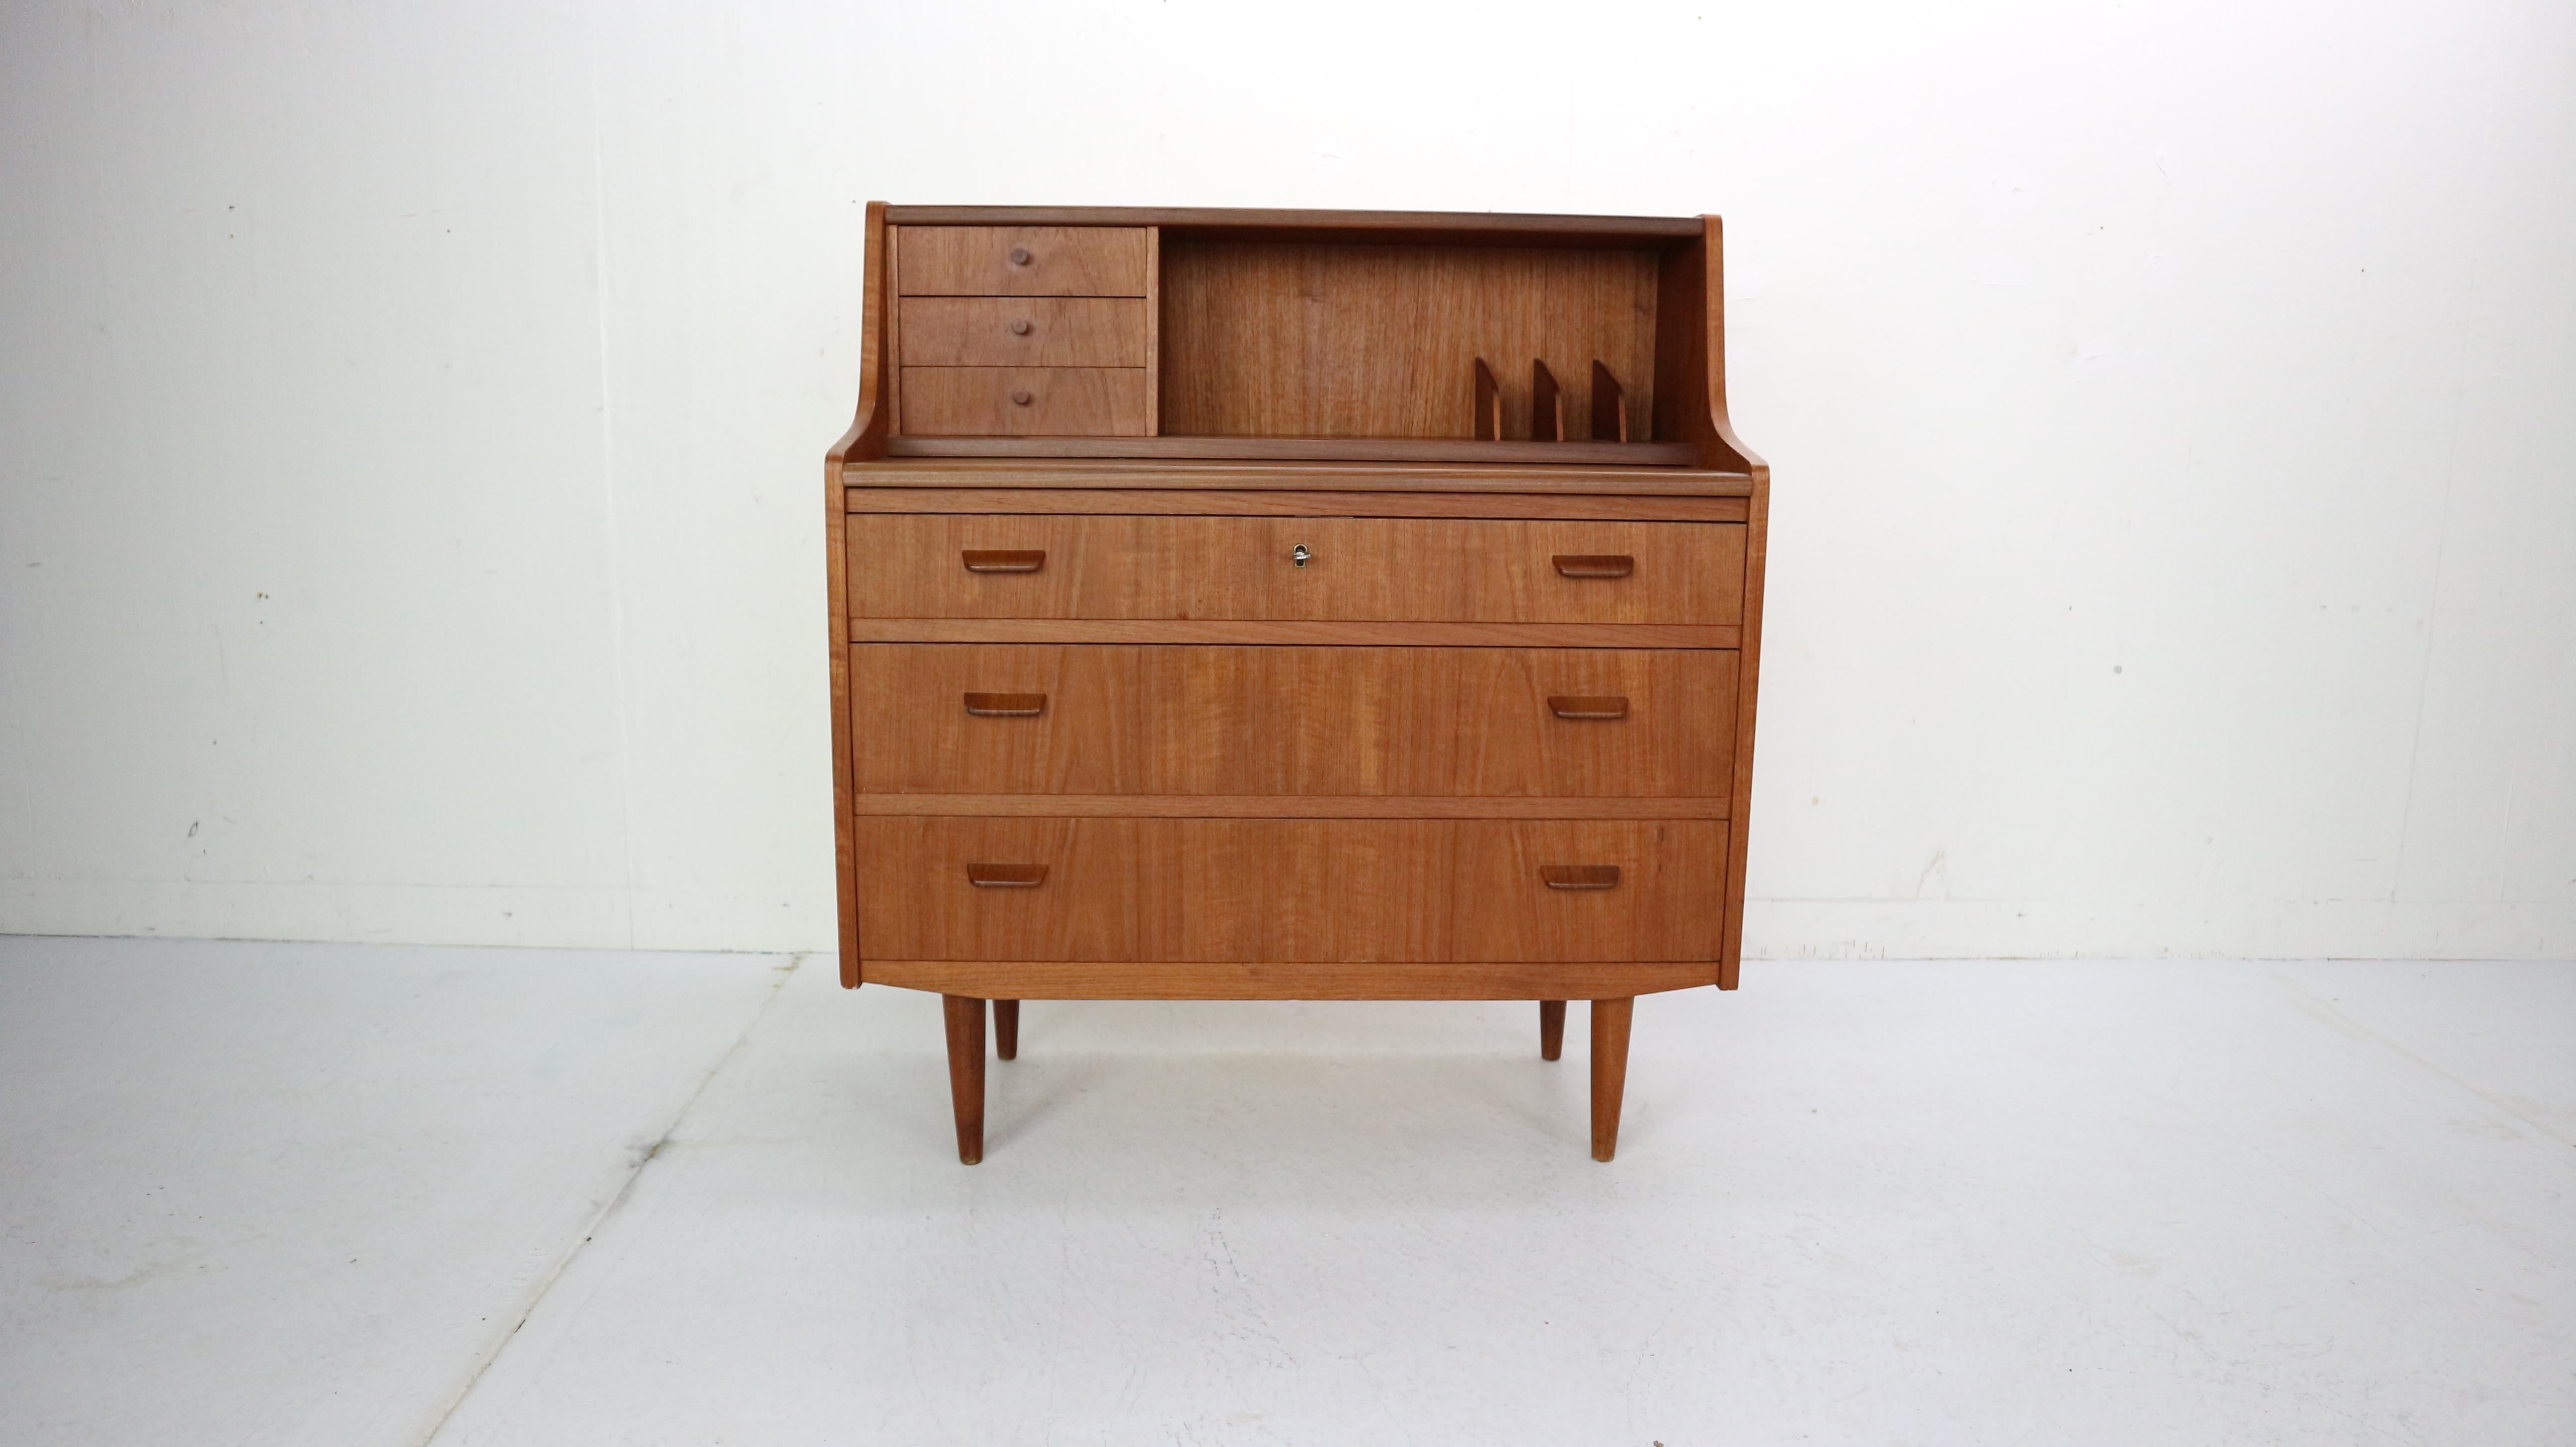 This midcentury Danish modern teak secretary desk was made in Denmark, circa 1960. The Classic Scandinavian Modern design has clean Minimalist lines and elegant curves. The upper cabinet features three small top drawers, storage space and a pull-out